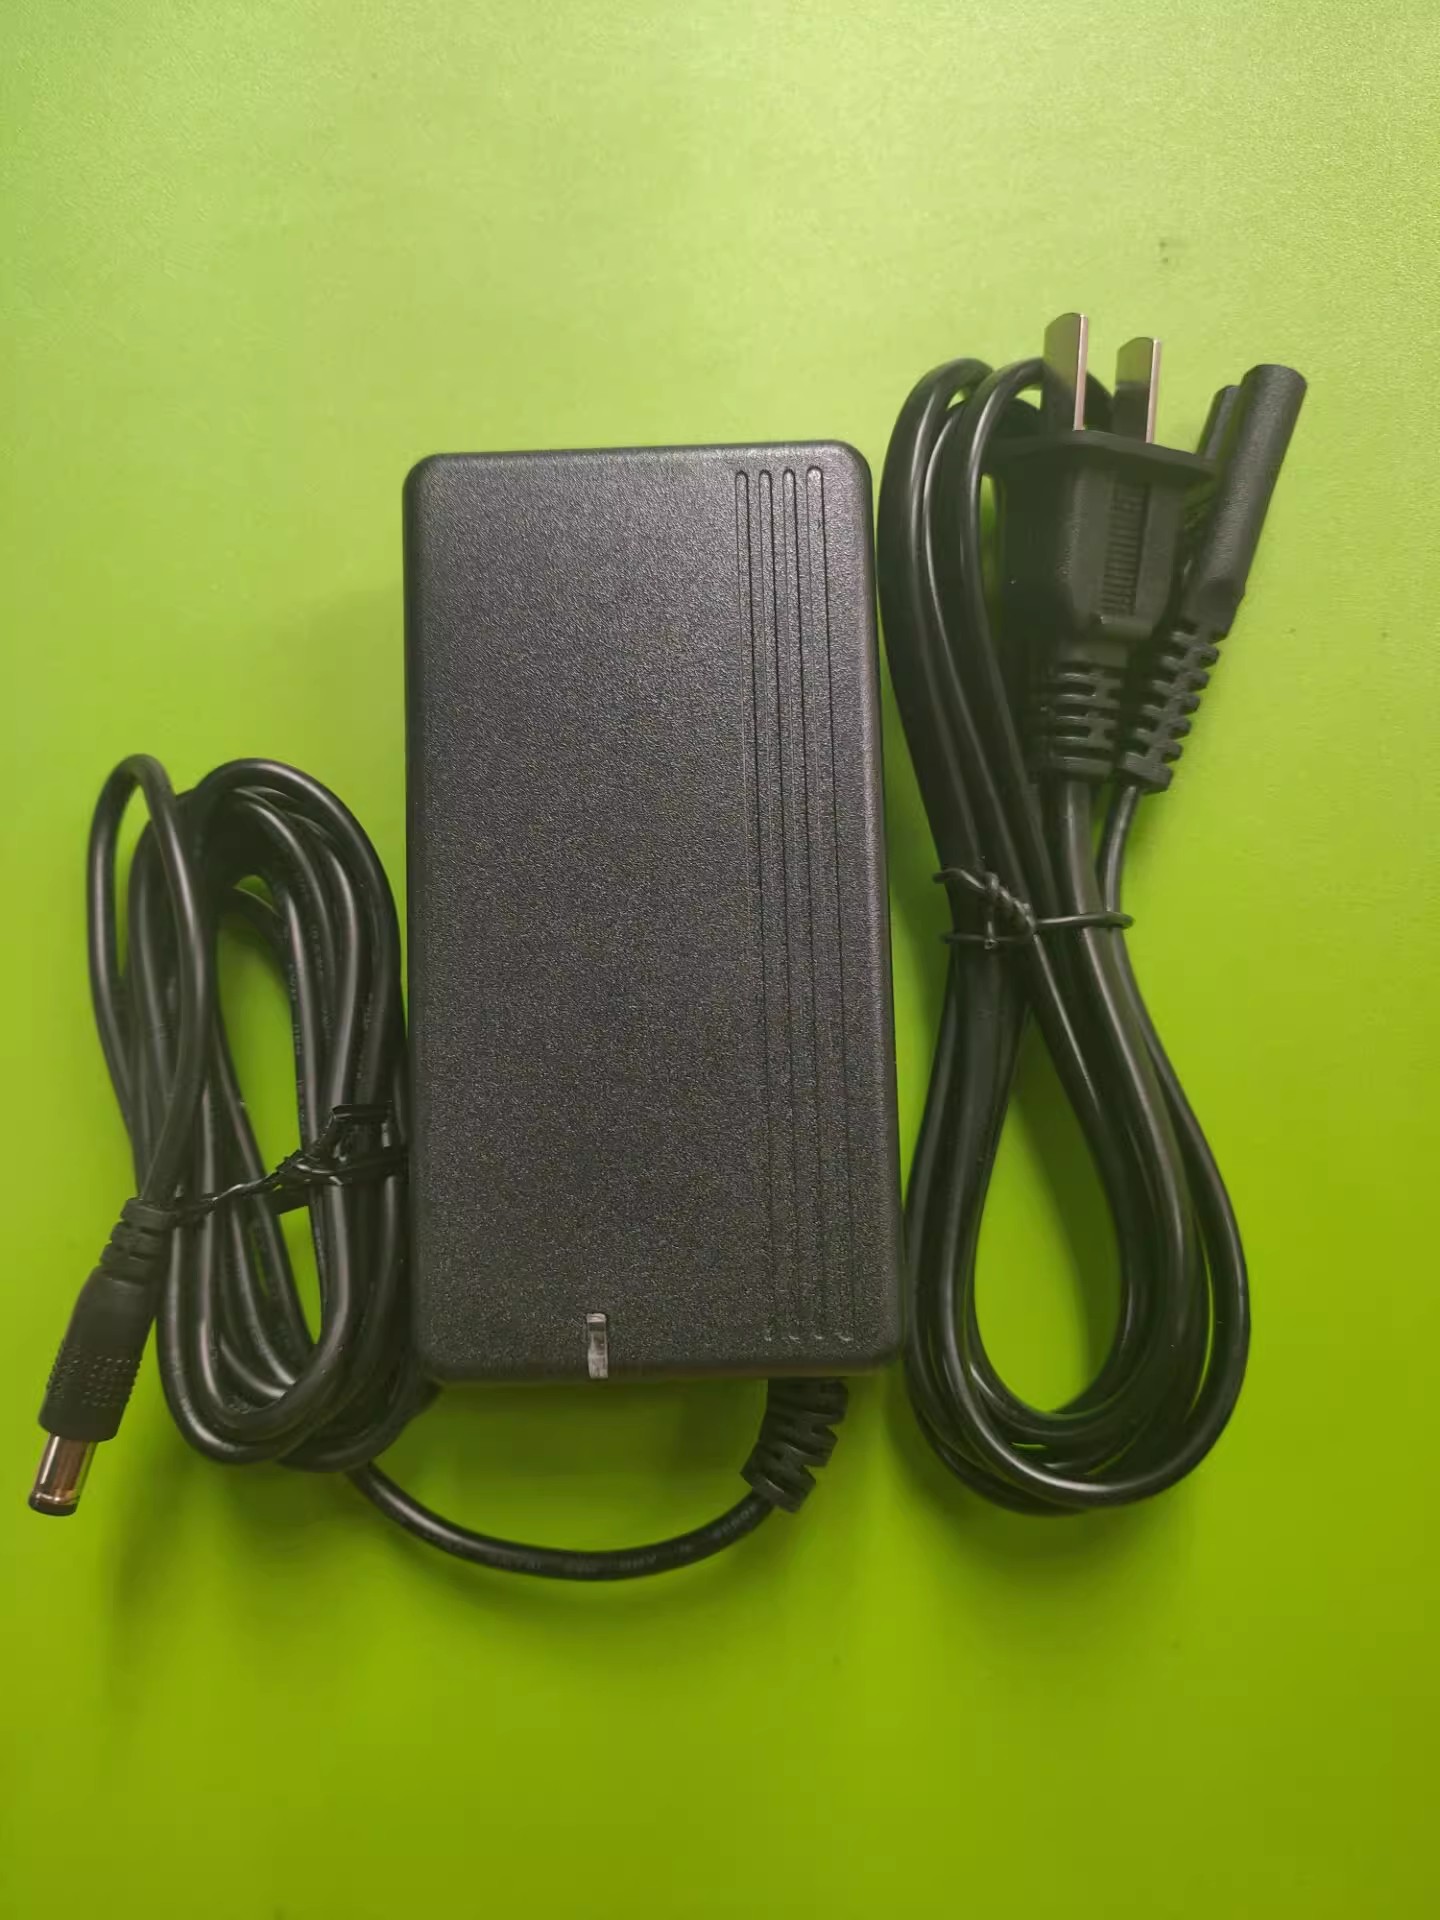 *Brand NEW* 18V 3A AC DC ADAPTHE MOSO SOY-1800300 POWER Supply